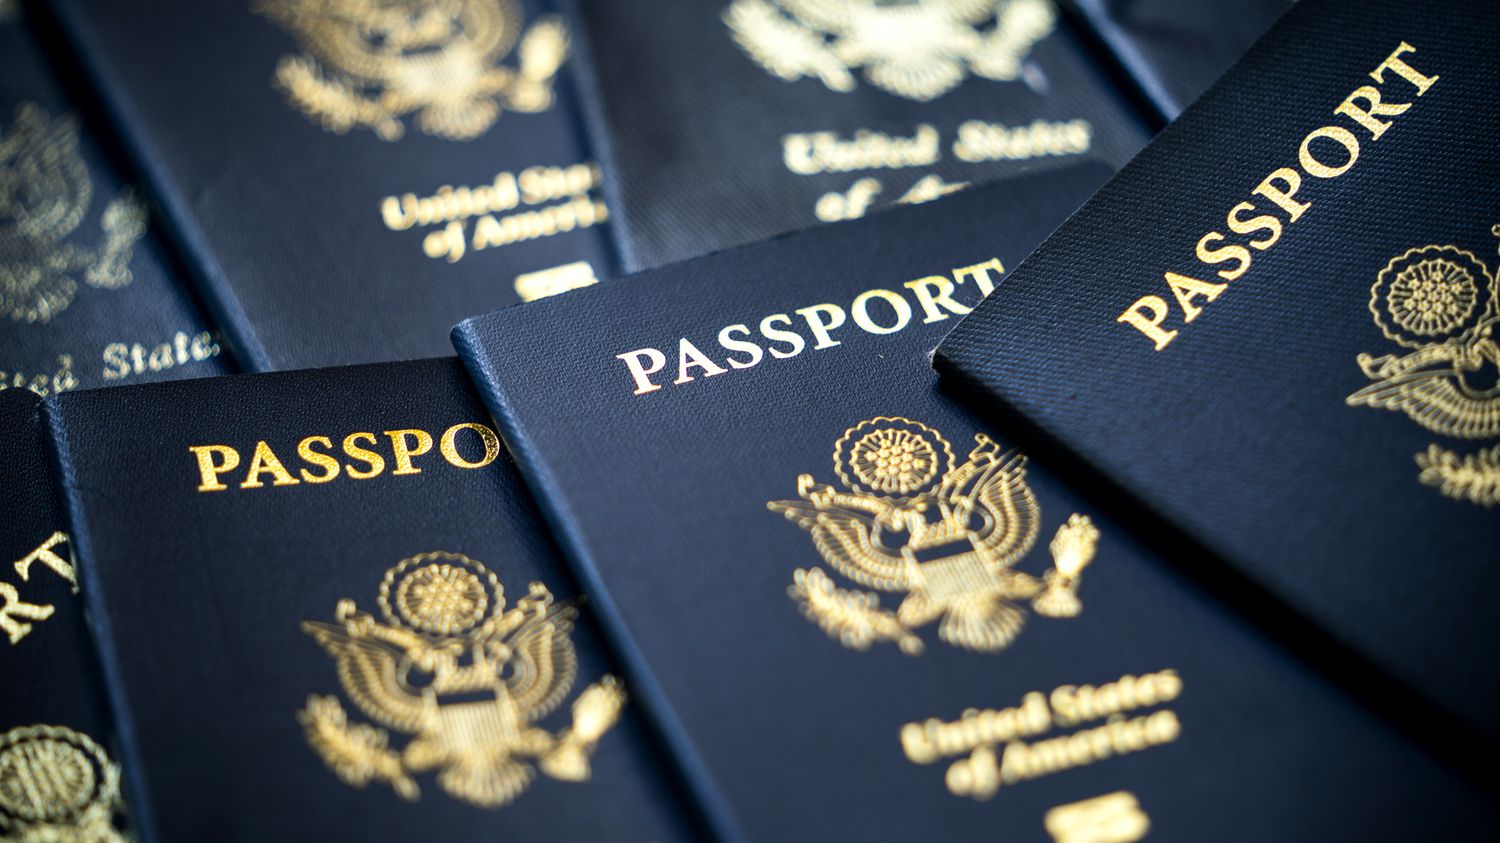 The United States Issues The First Passport With “x